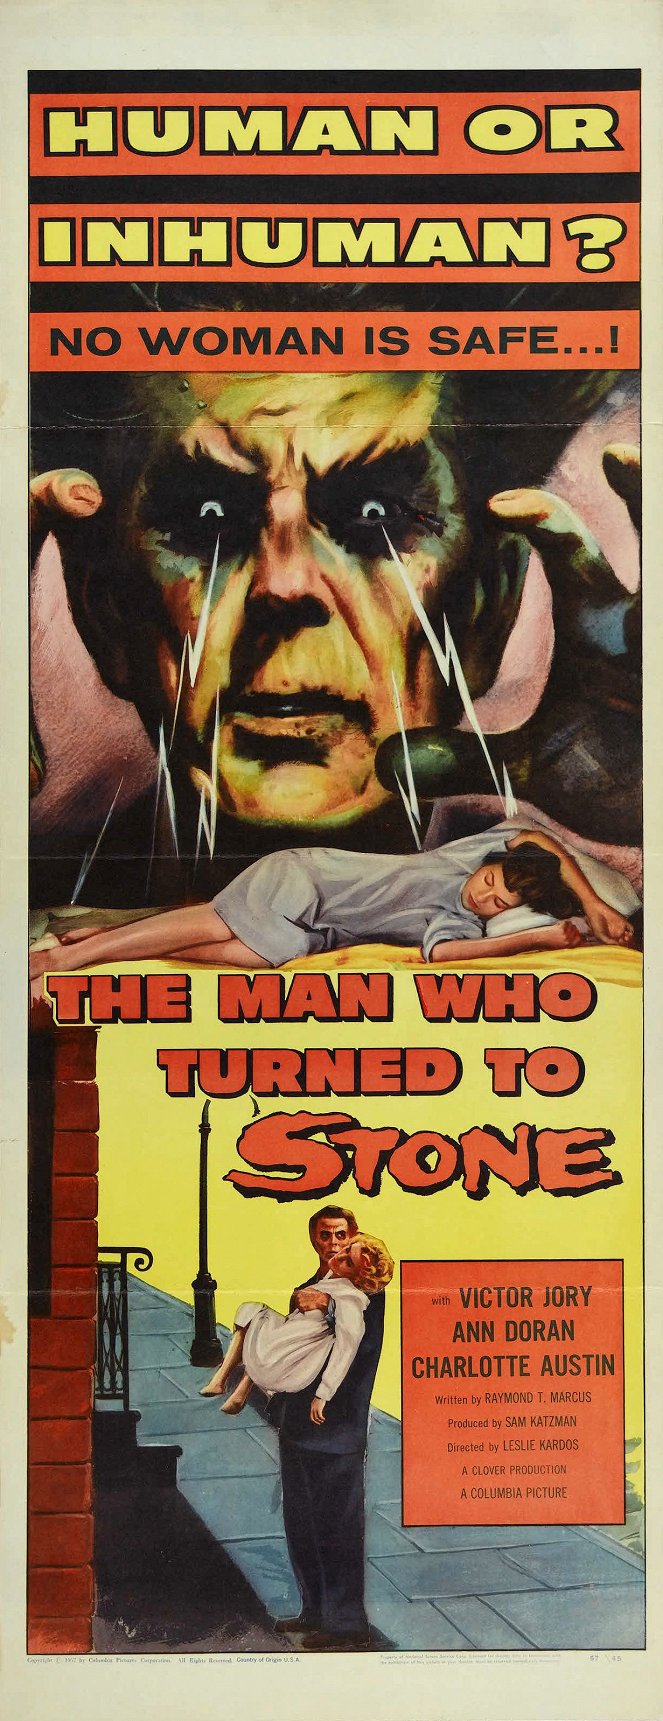 The Man Who Turned to Stone - Julisteet